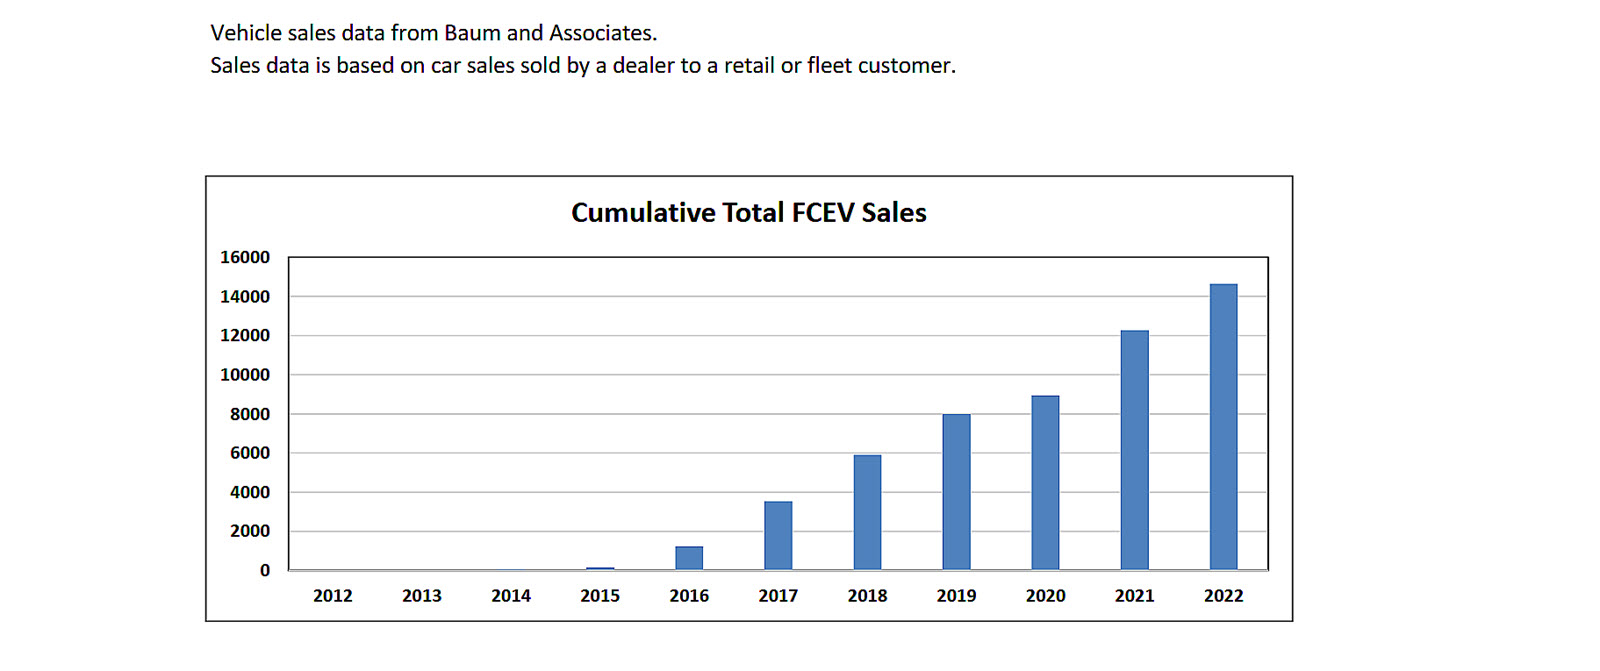 FCEV sales throughout the years